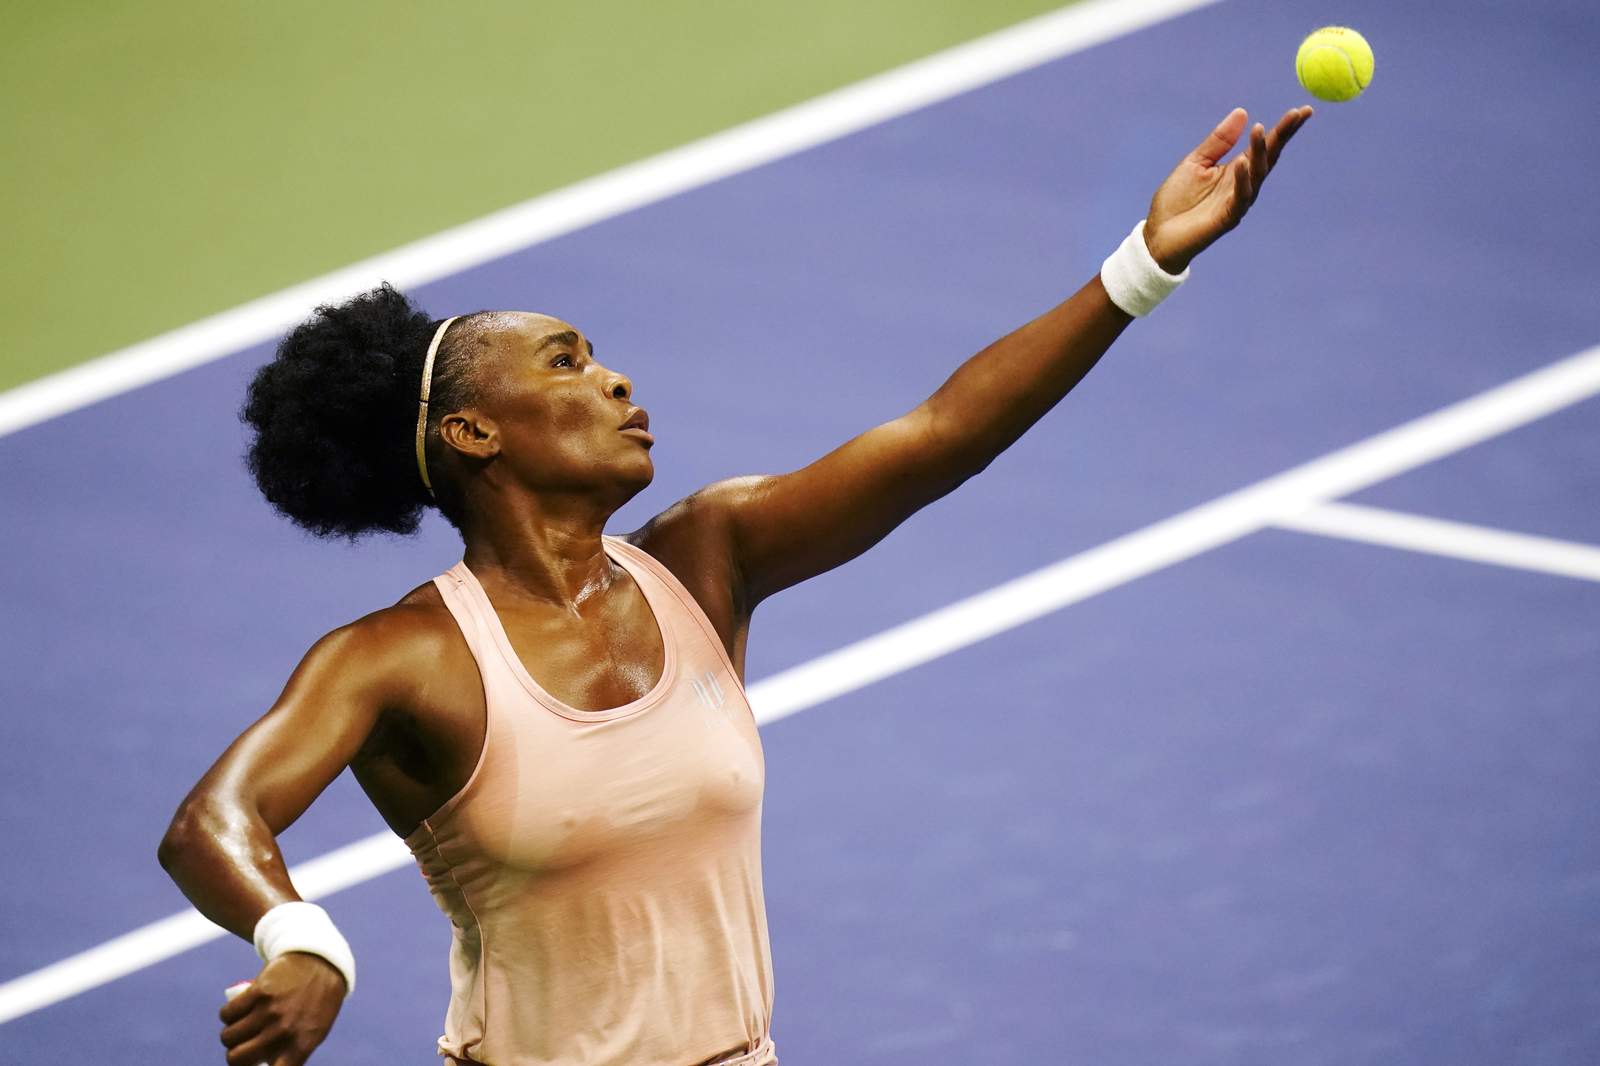 The Latest: A 1st for Venus: She loses in 1st round of Open